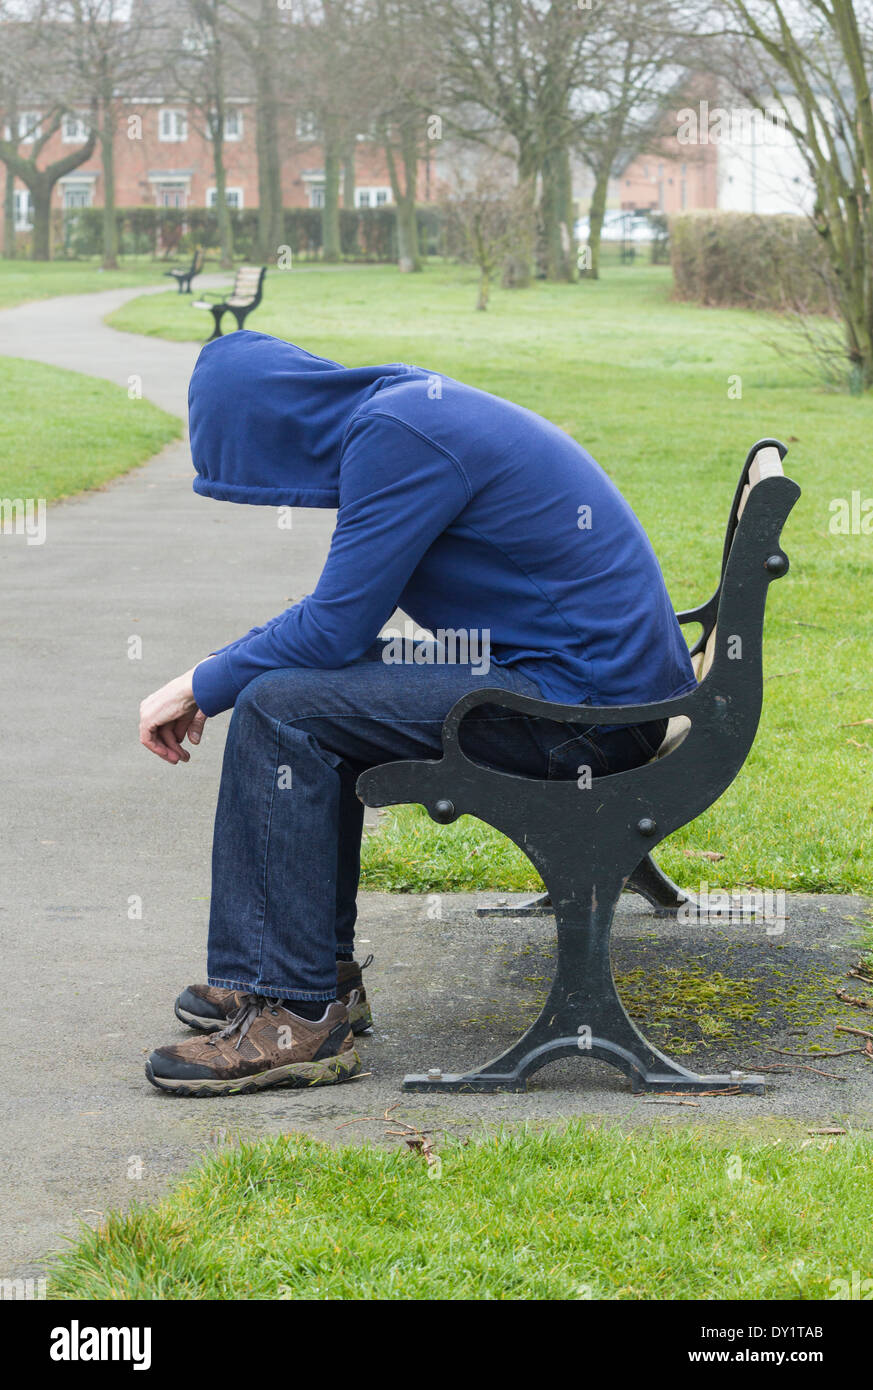 Male wearing hoodie sitting on park bench Stock Photo - Alamy